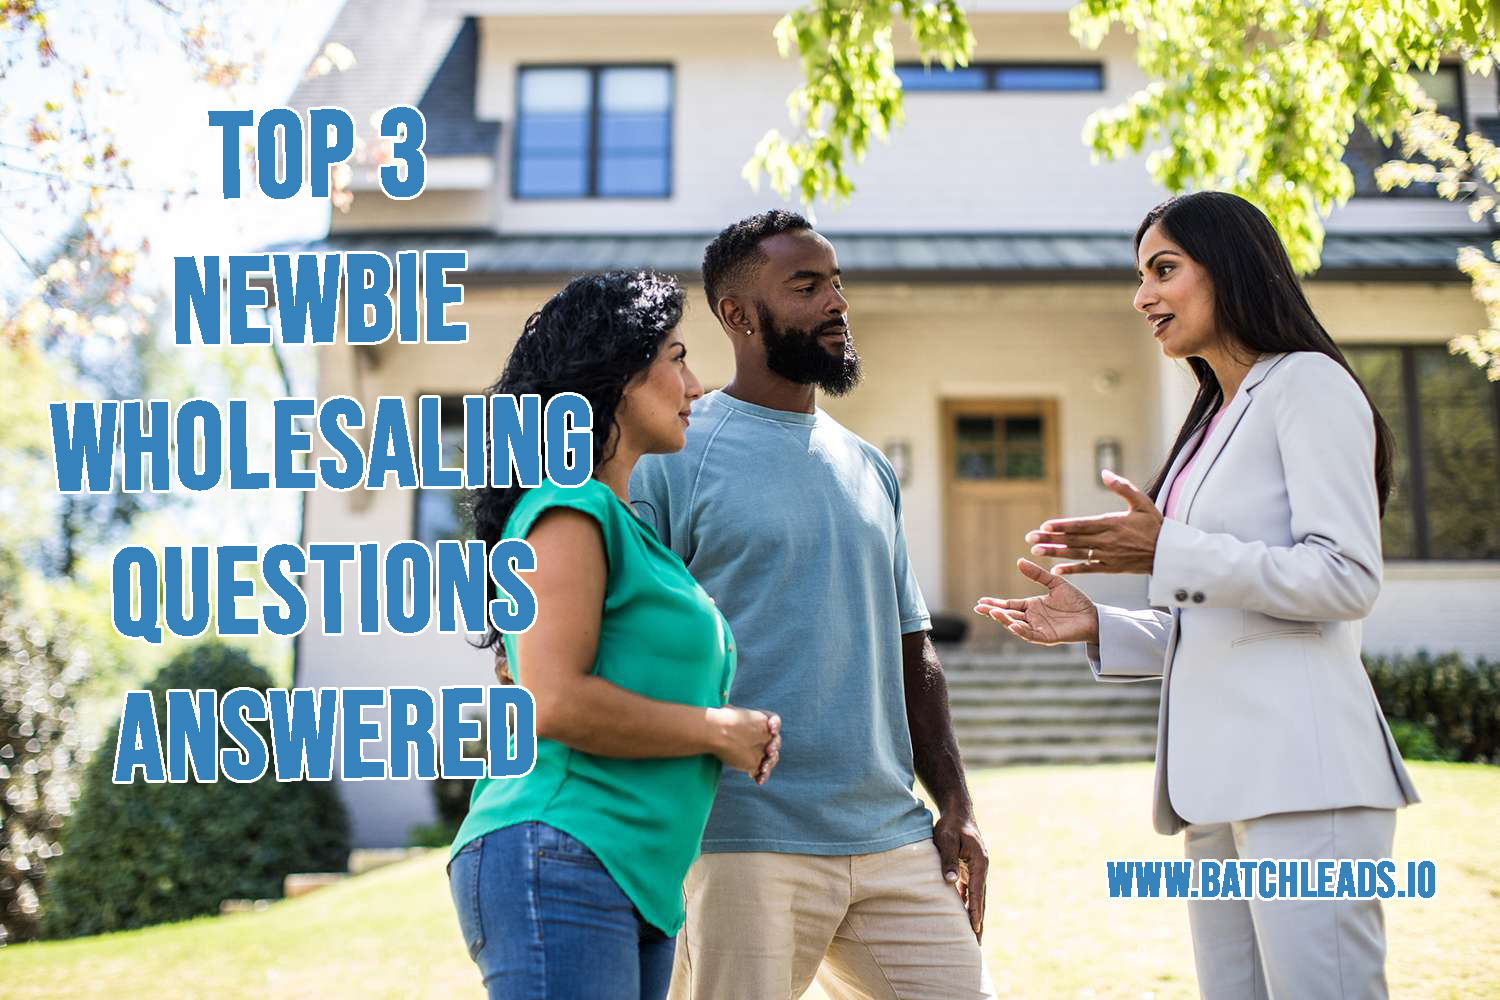 Top 3 Newbie Wholesaling Questions Answered